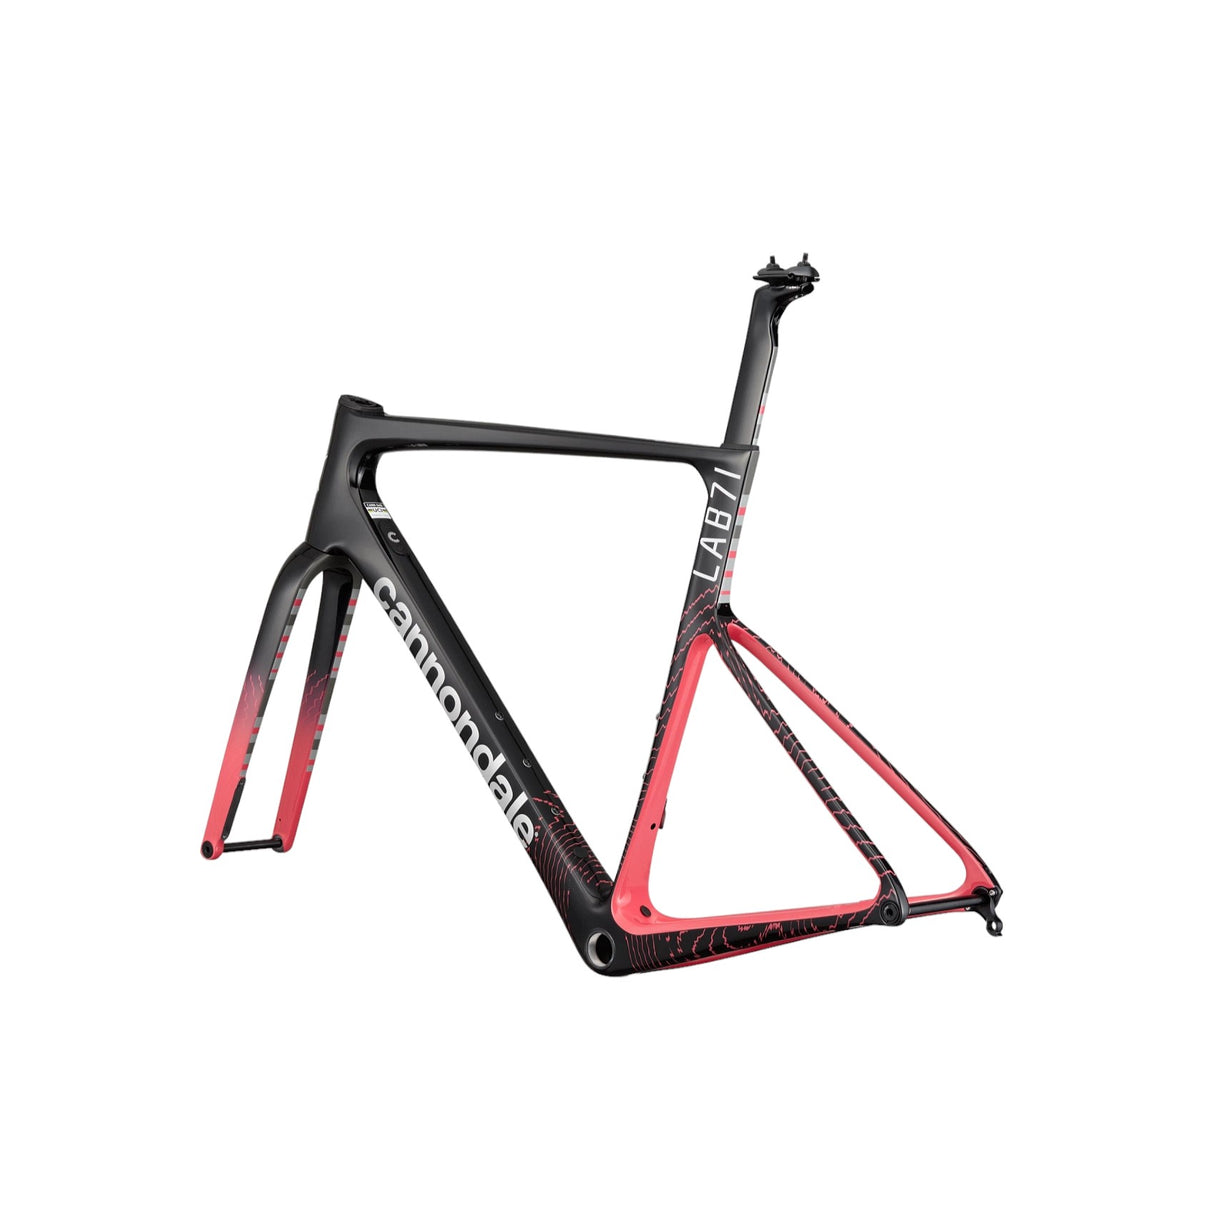 Cannondale SuperSix EVO LAB71 Team Changeout Frameset | Strictly Bicycles